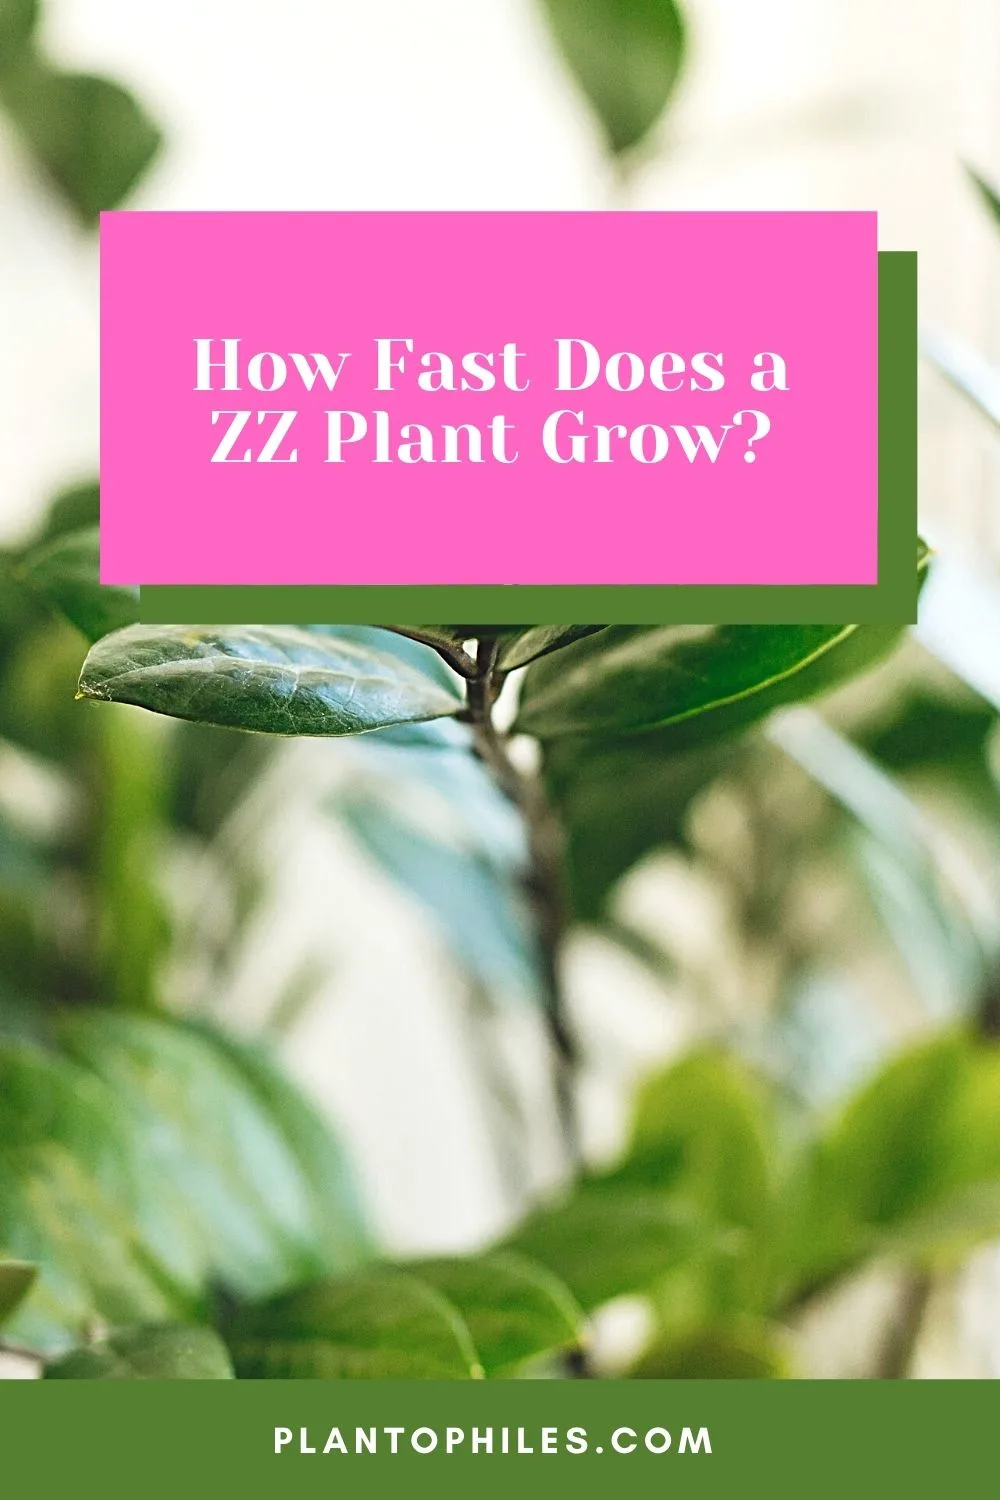 How Fast Does a ZZ Plant Grow?